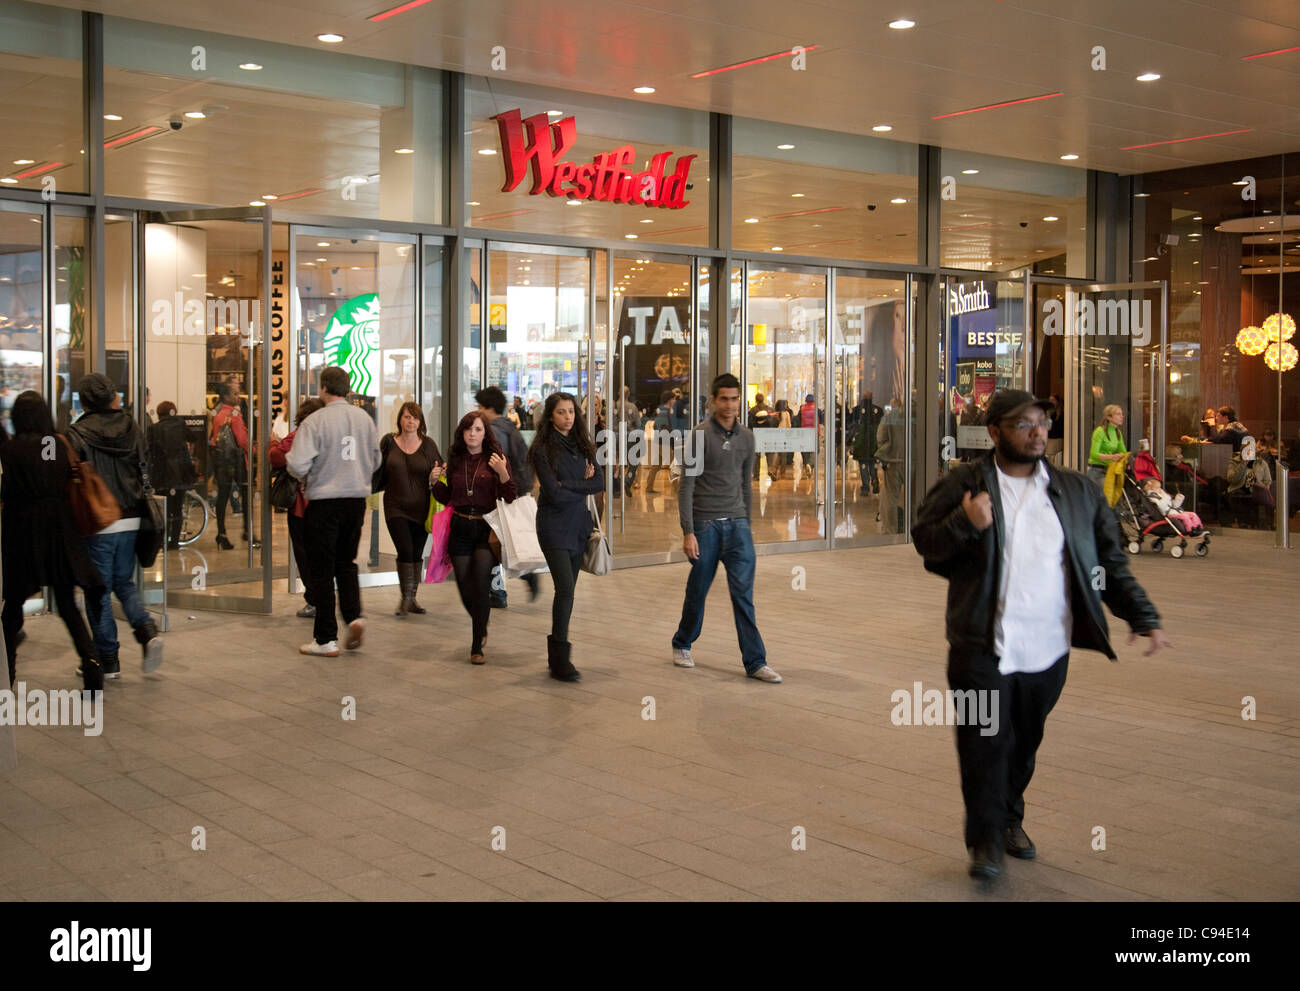 Shoppers at entrance to Westfield shopping centre, Stratford, London UK Stock Photo